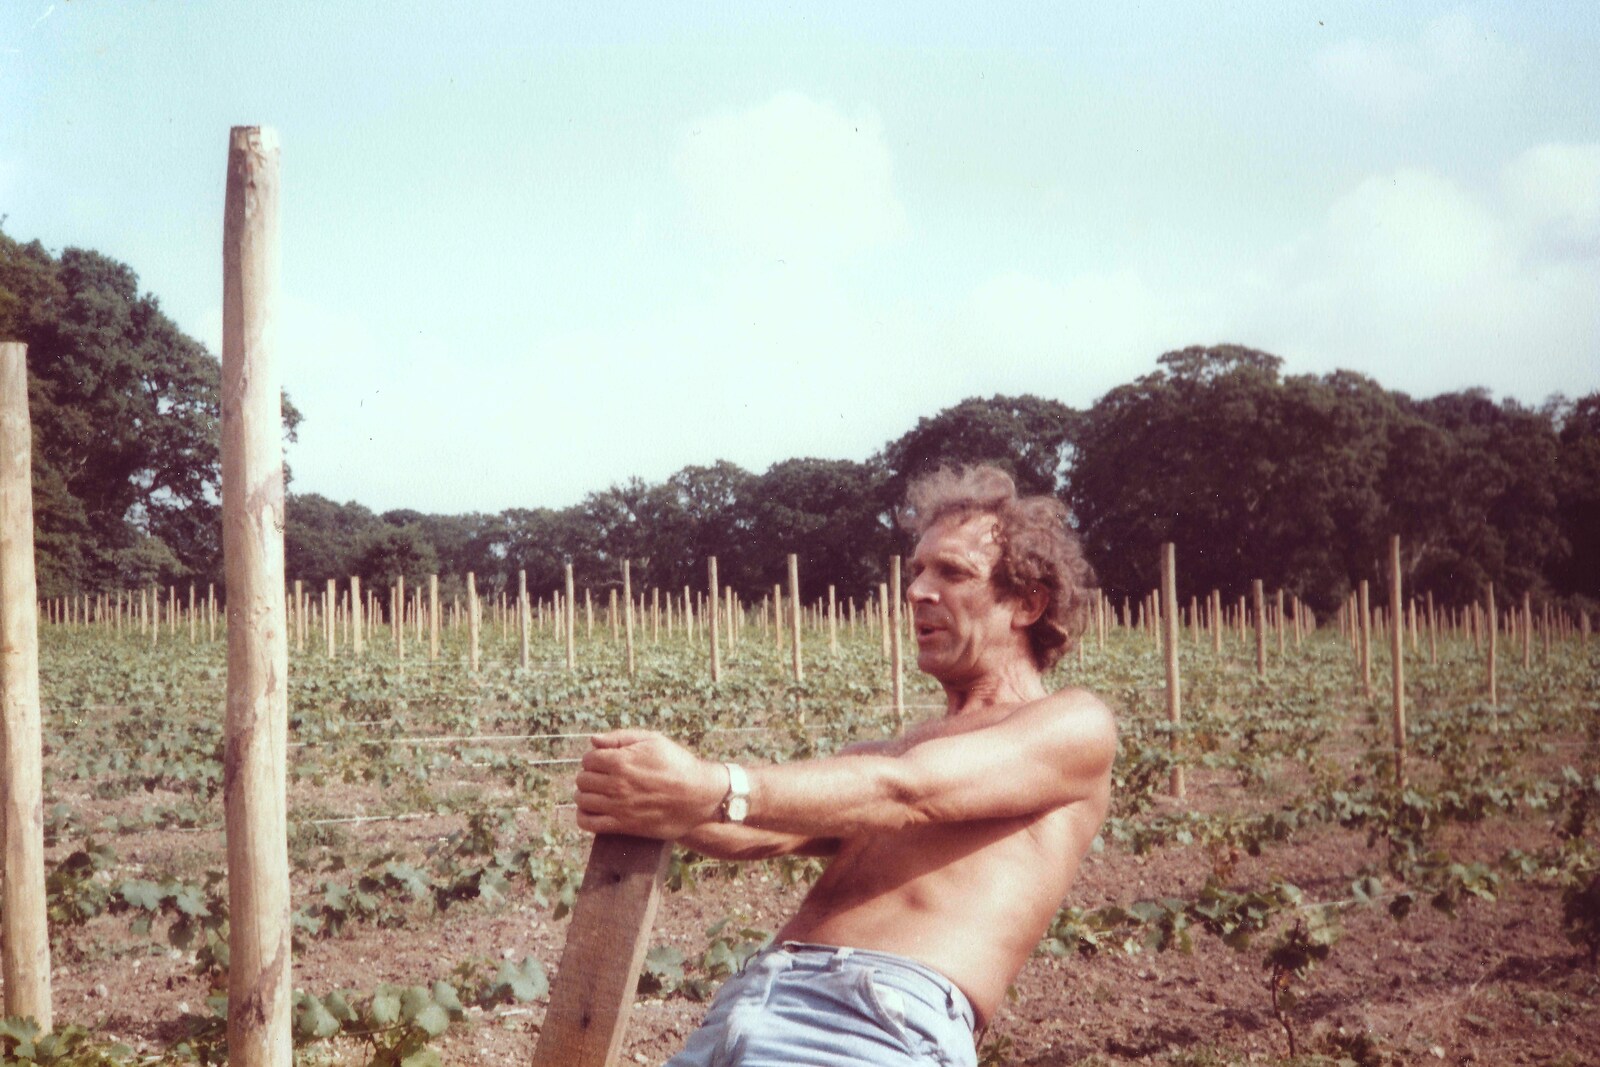 Mike pulls more wires from Constructing a Vineyard, Harrow Road, Bransgore, Dorset - 1st September 1981